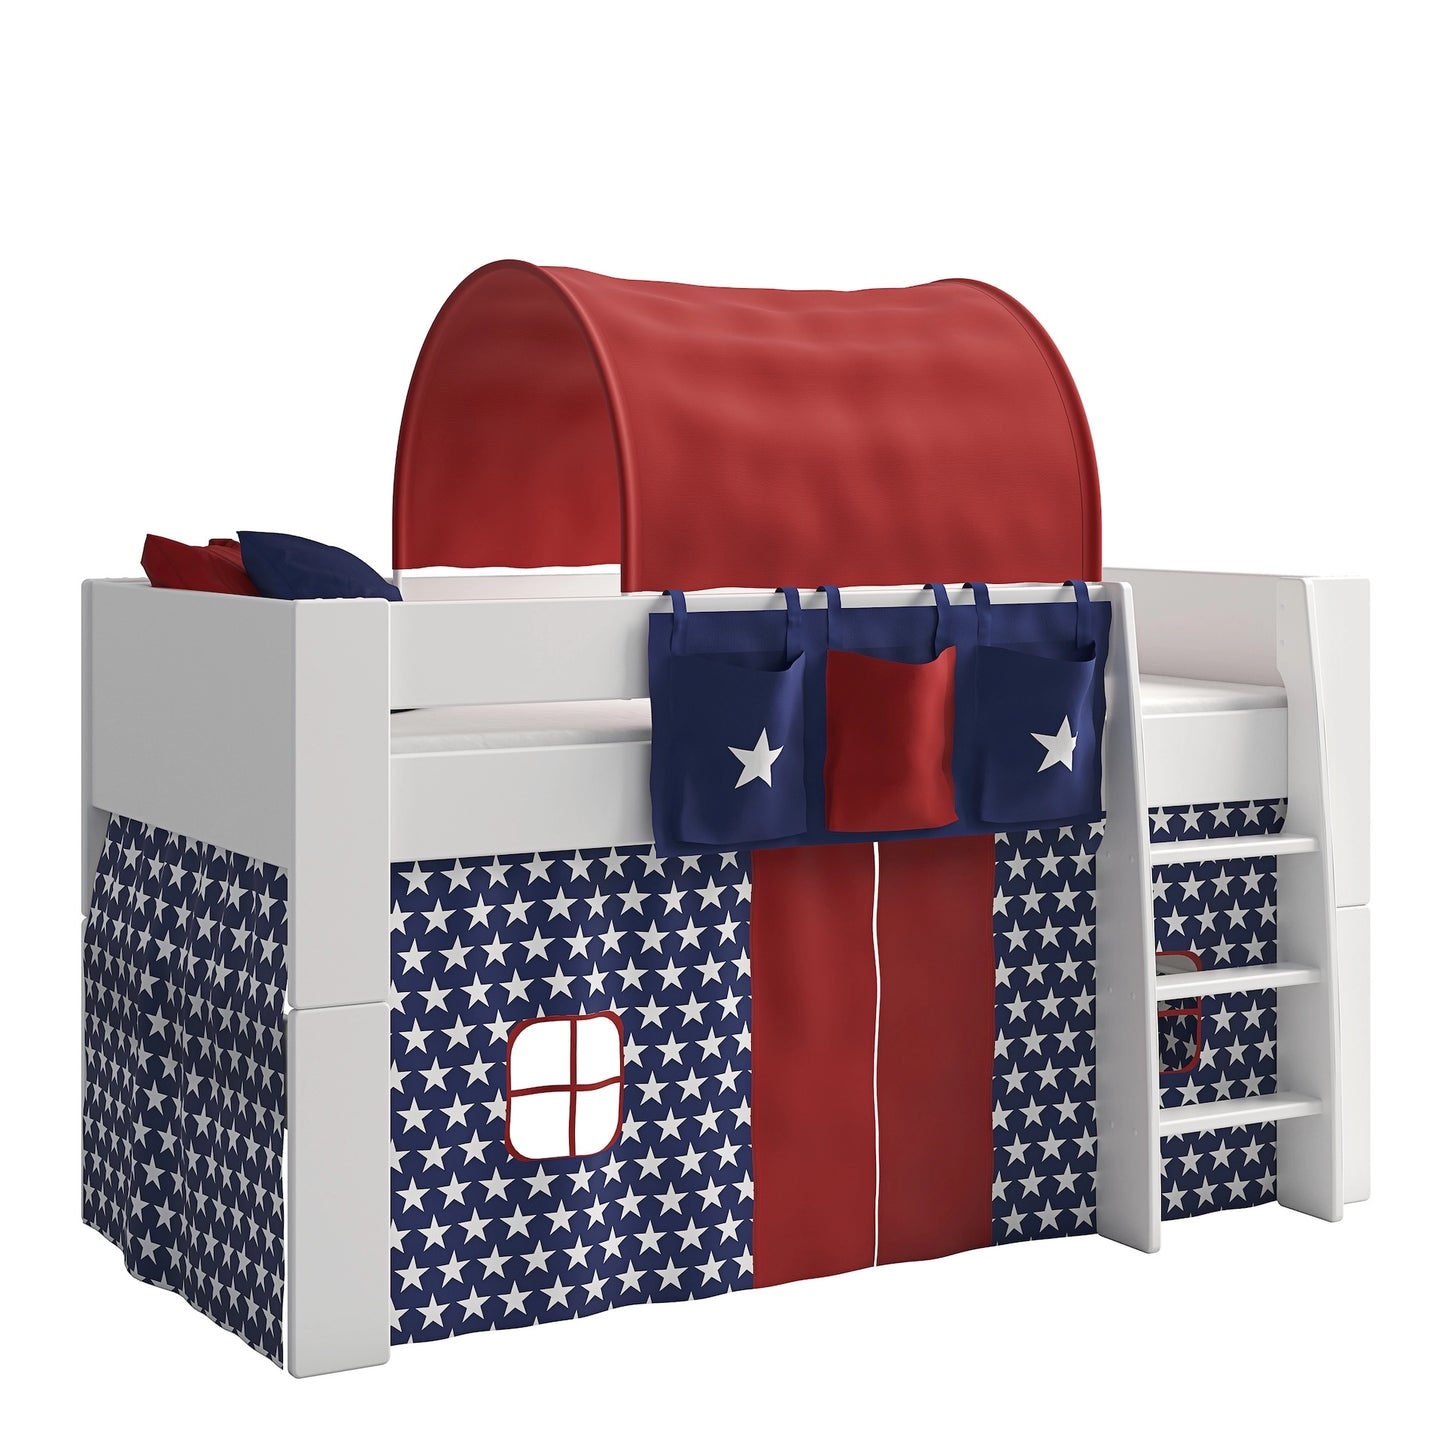 Furniture To Go Steens For Kids Star Tent